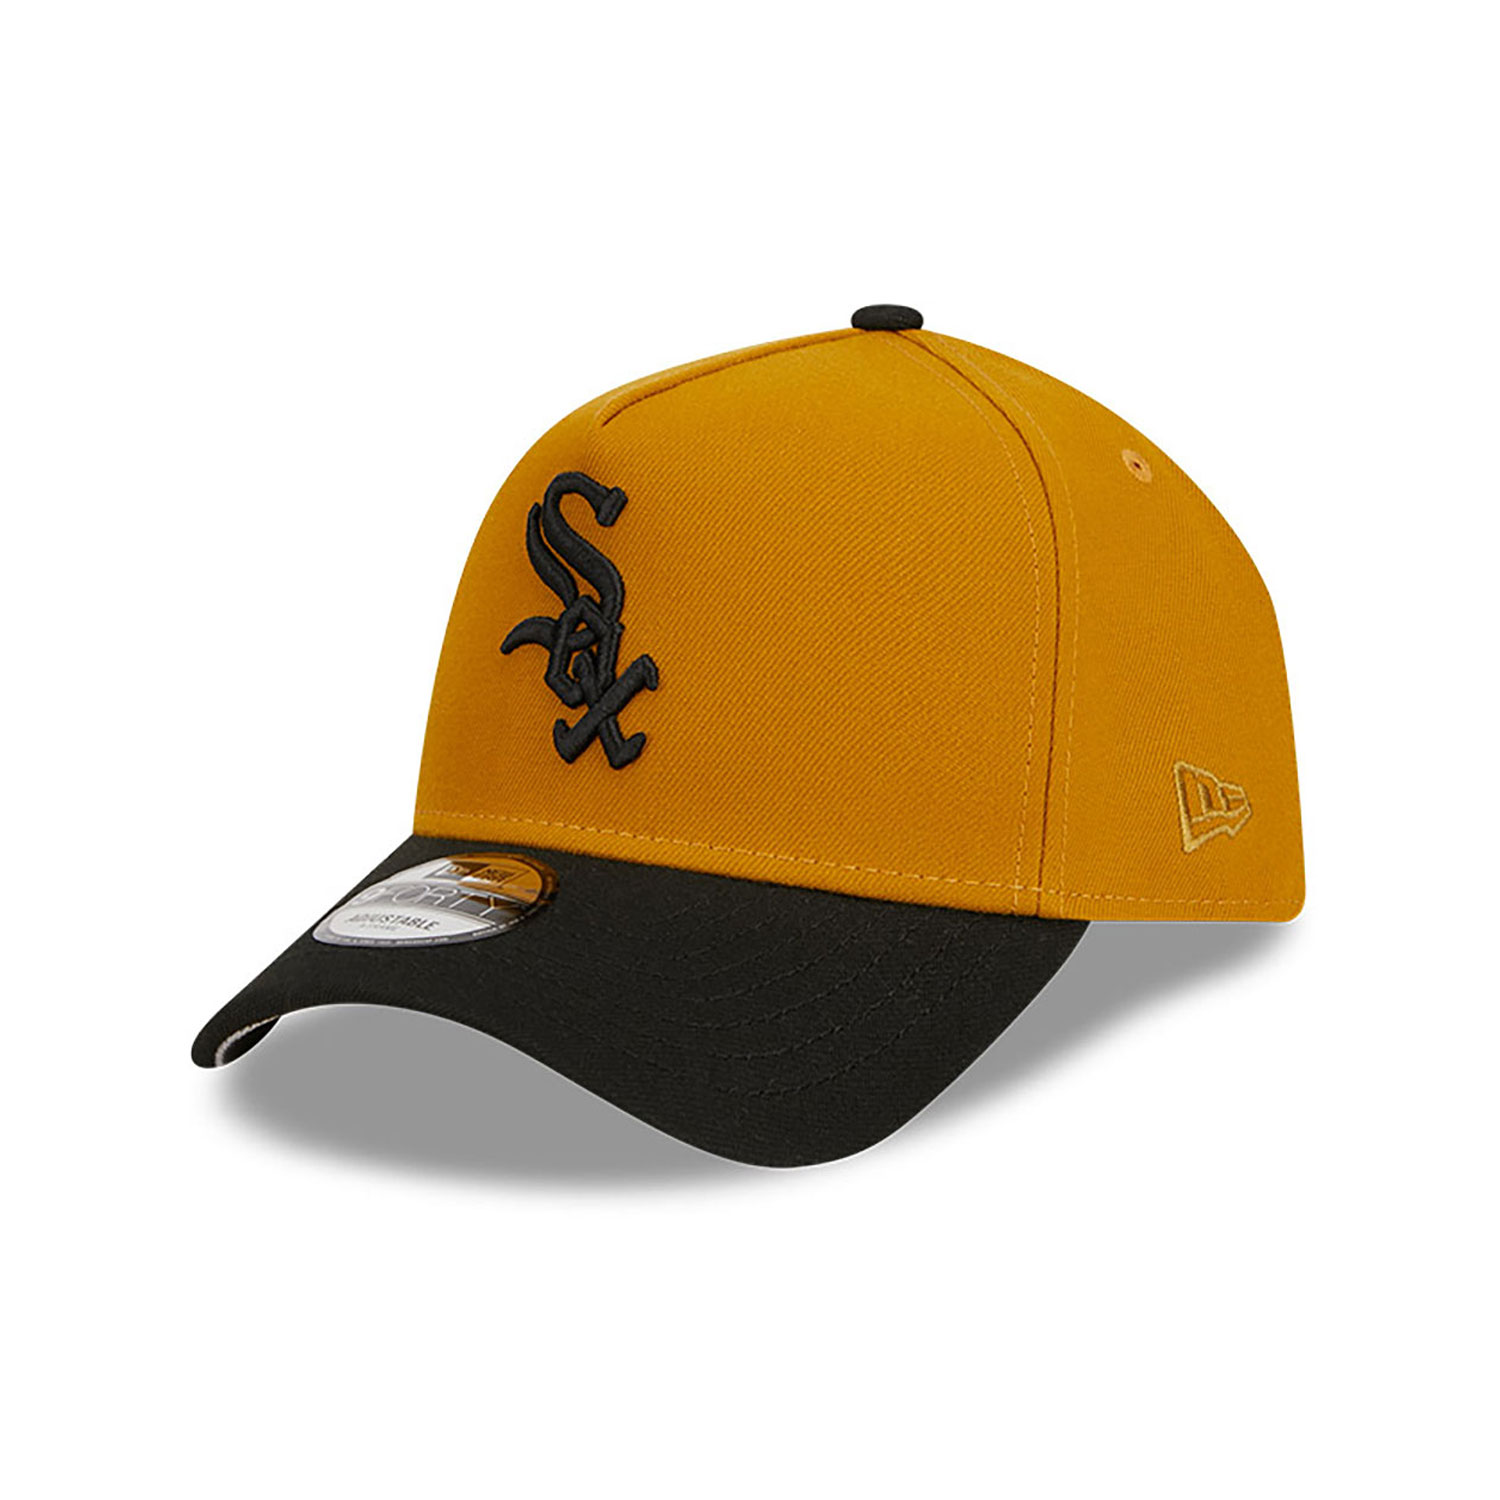 Chicago White Sox Rustic Fall Gold A-Frame 9FORTY Adjustable Cap